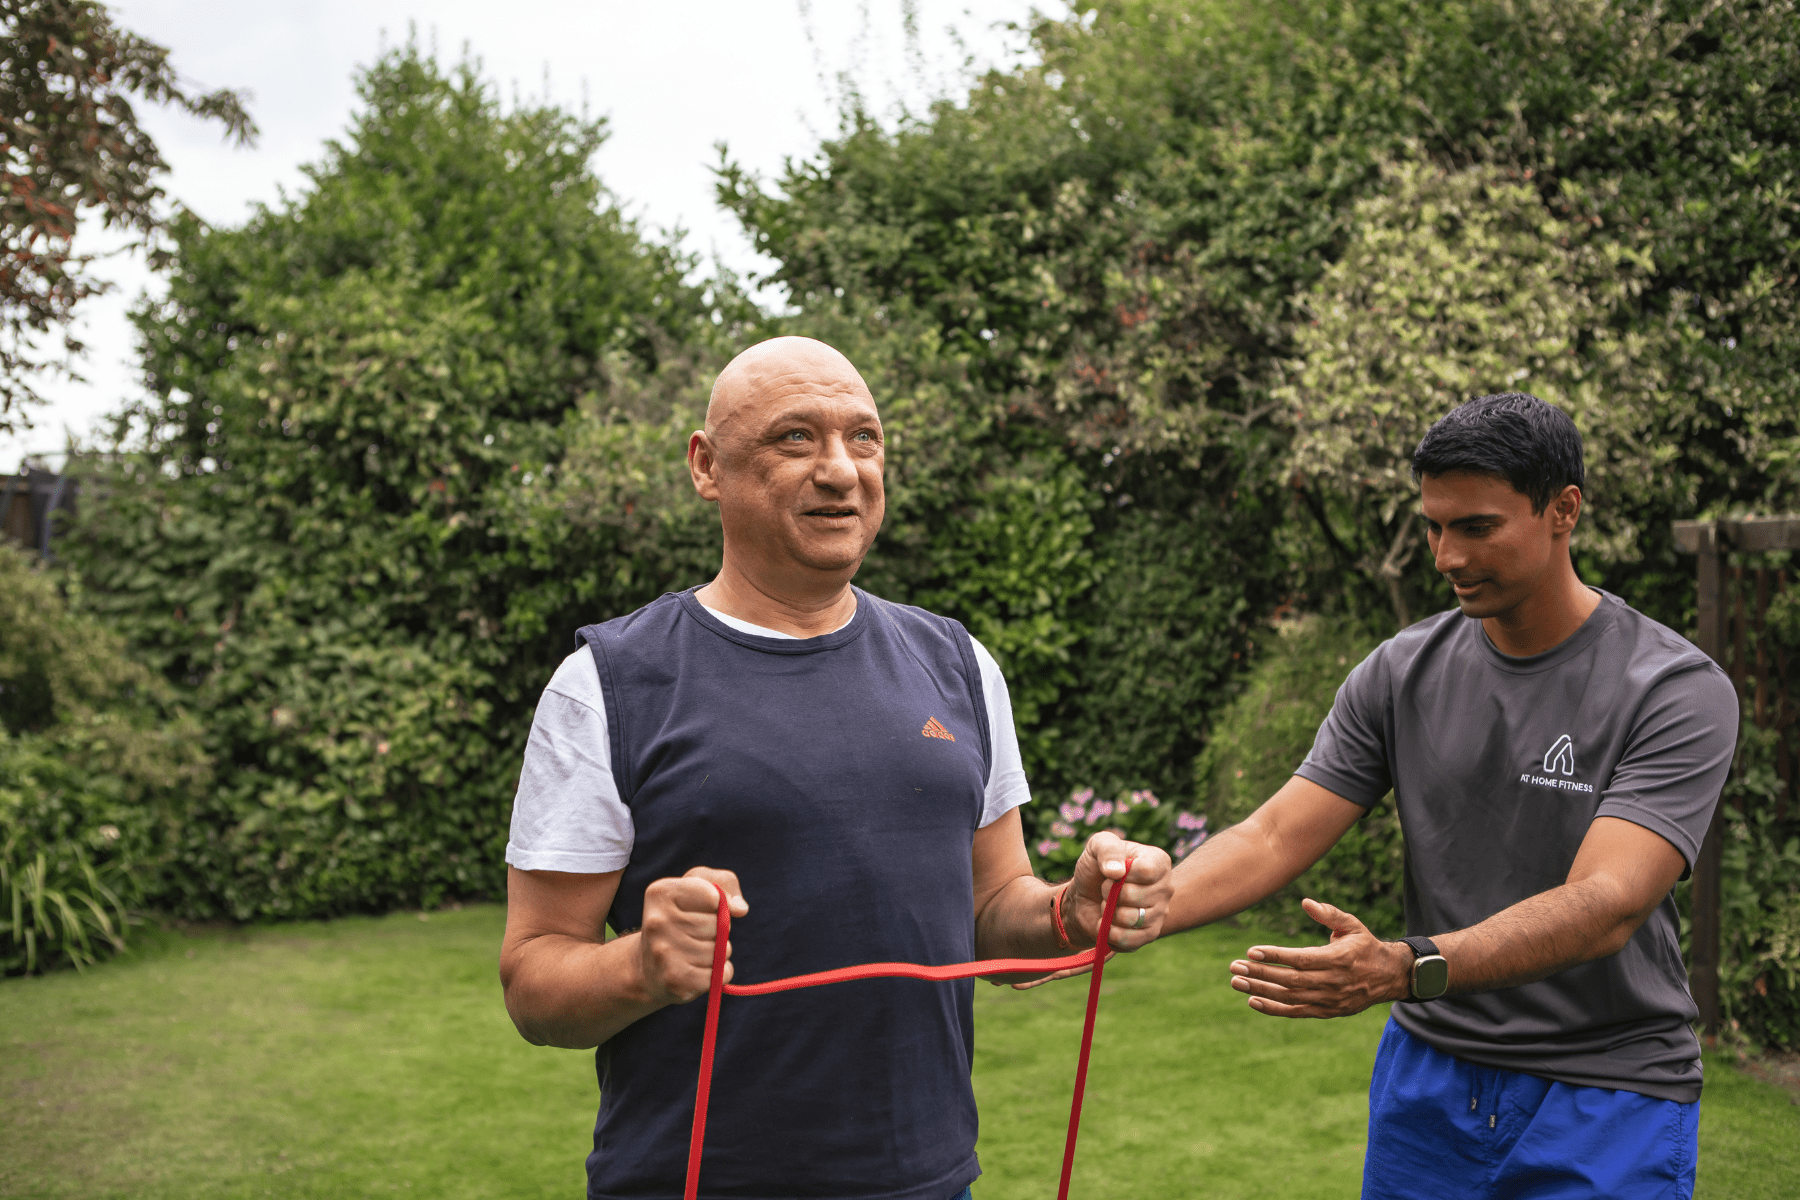 External rotation exercise with the resistance band